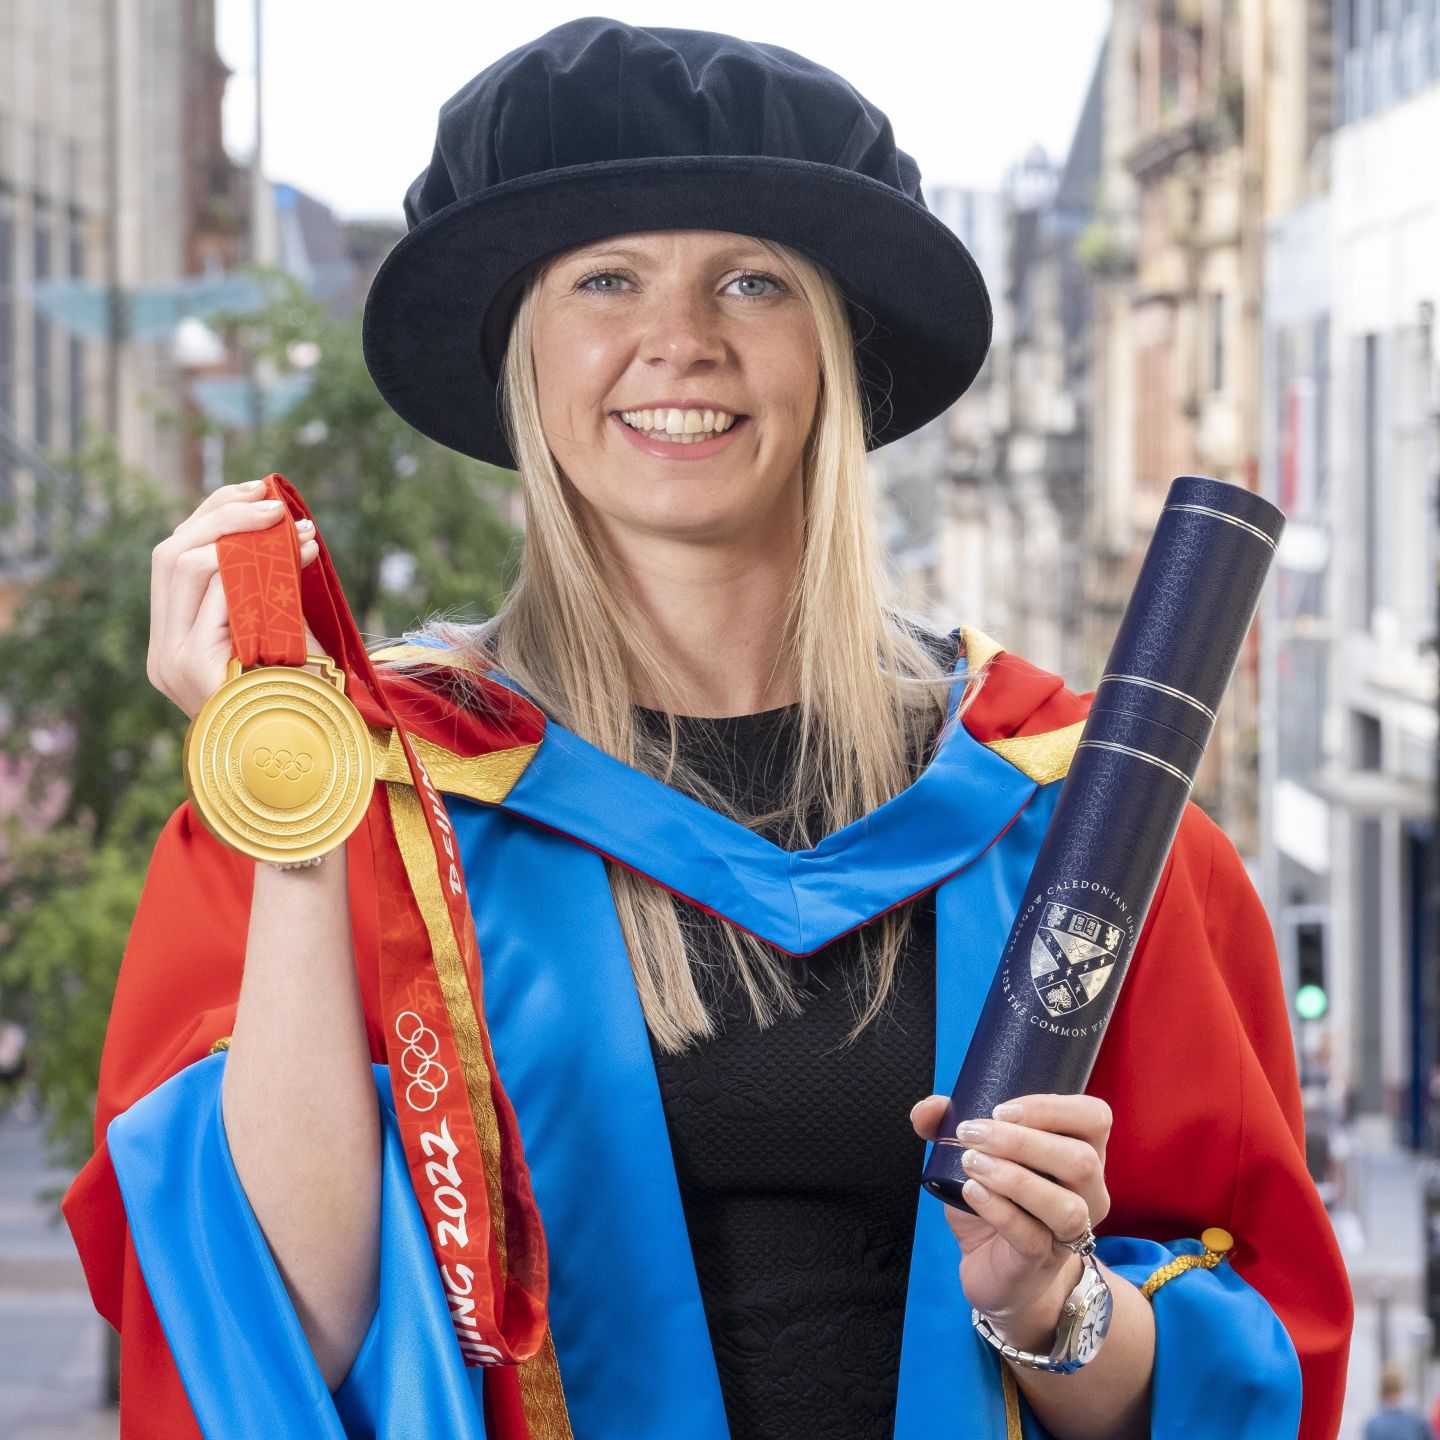 An image of Vicky Wright, a GCU alumna and a Scottish curler, holding her Olympic Gold medal in her graduation robes.